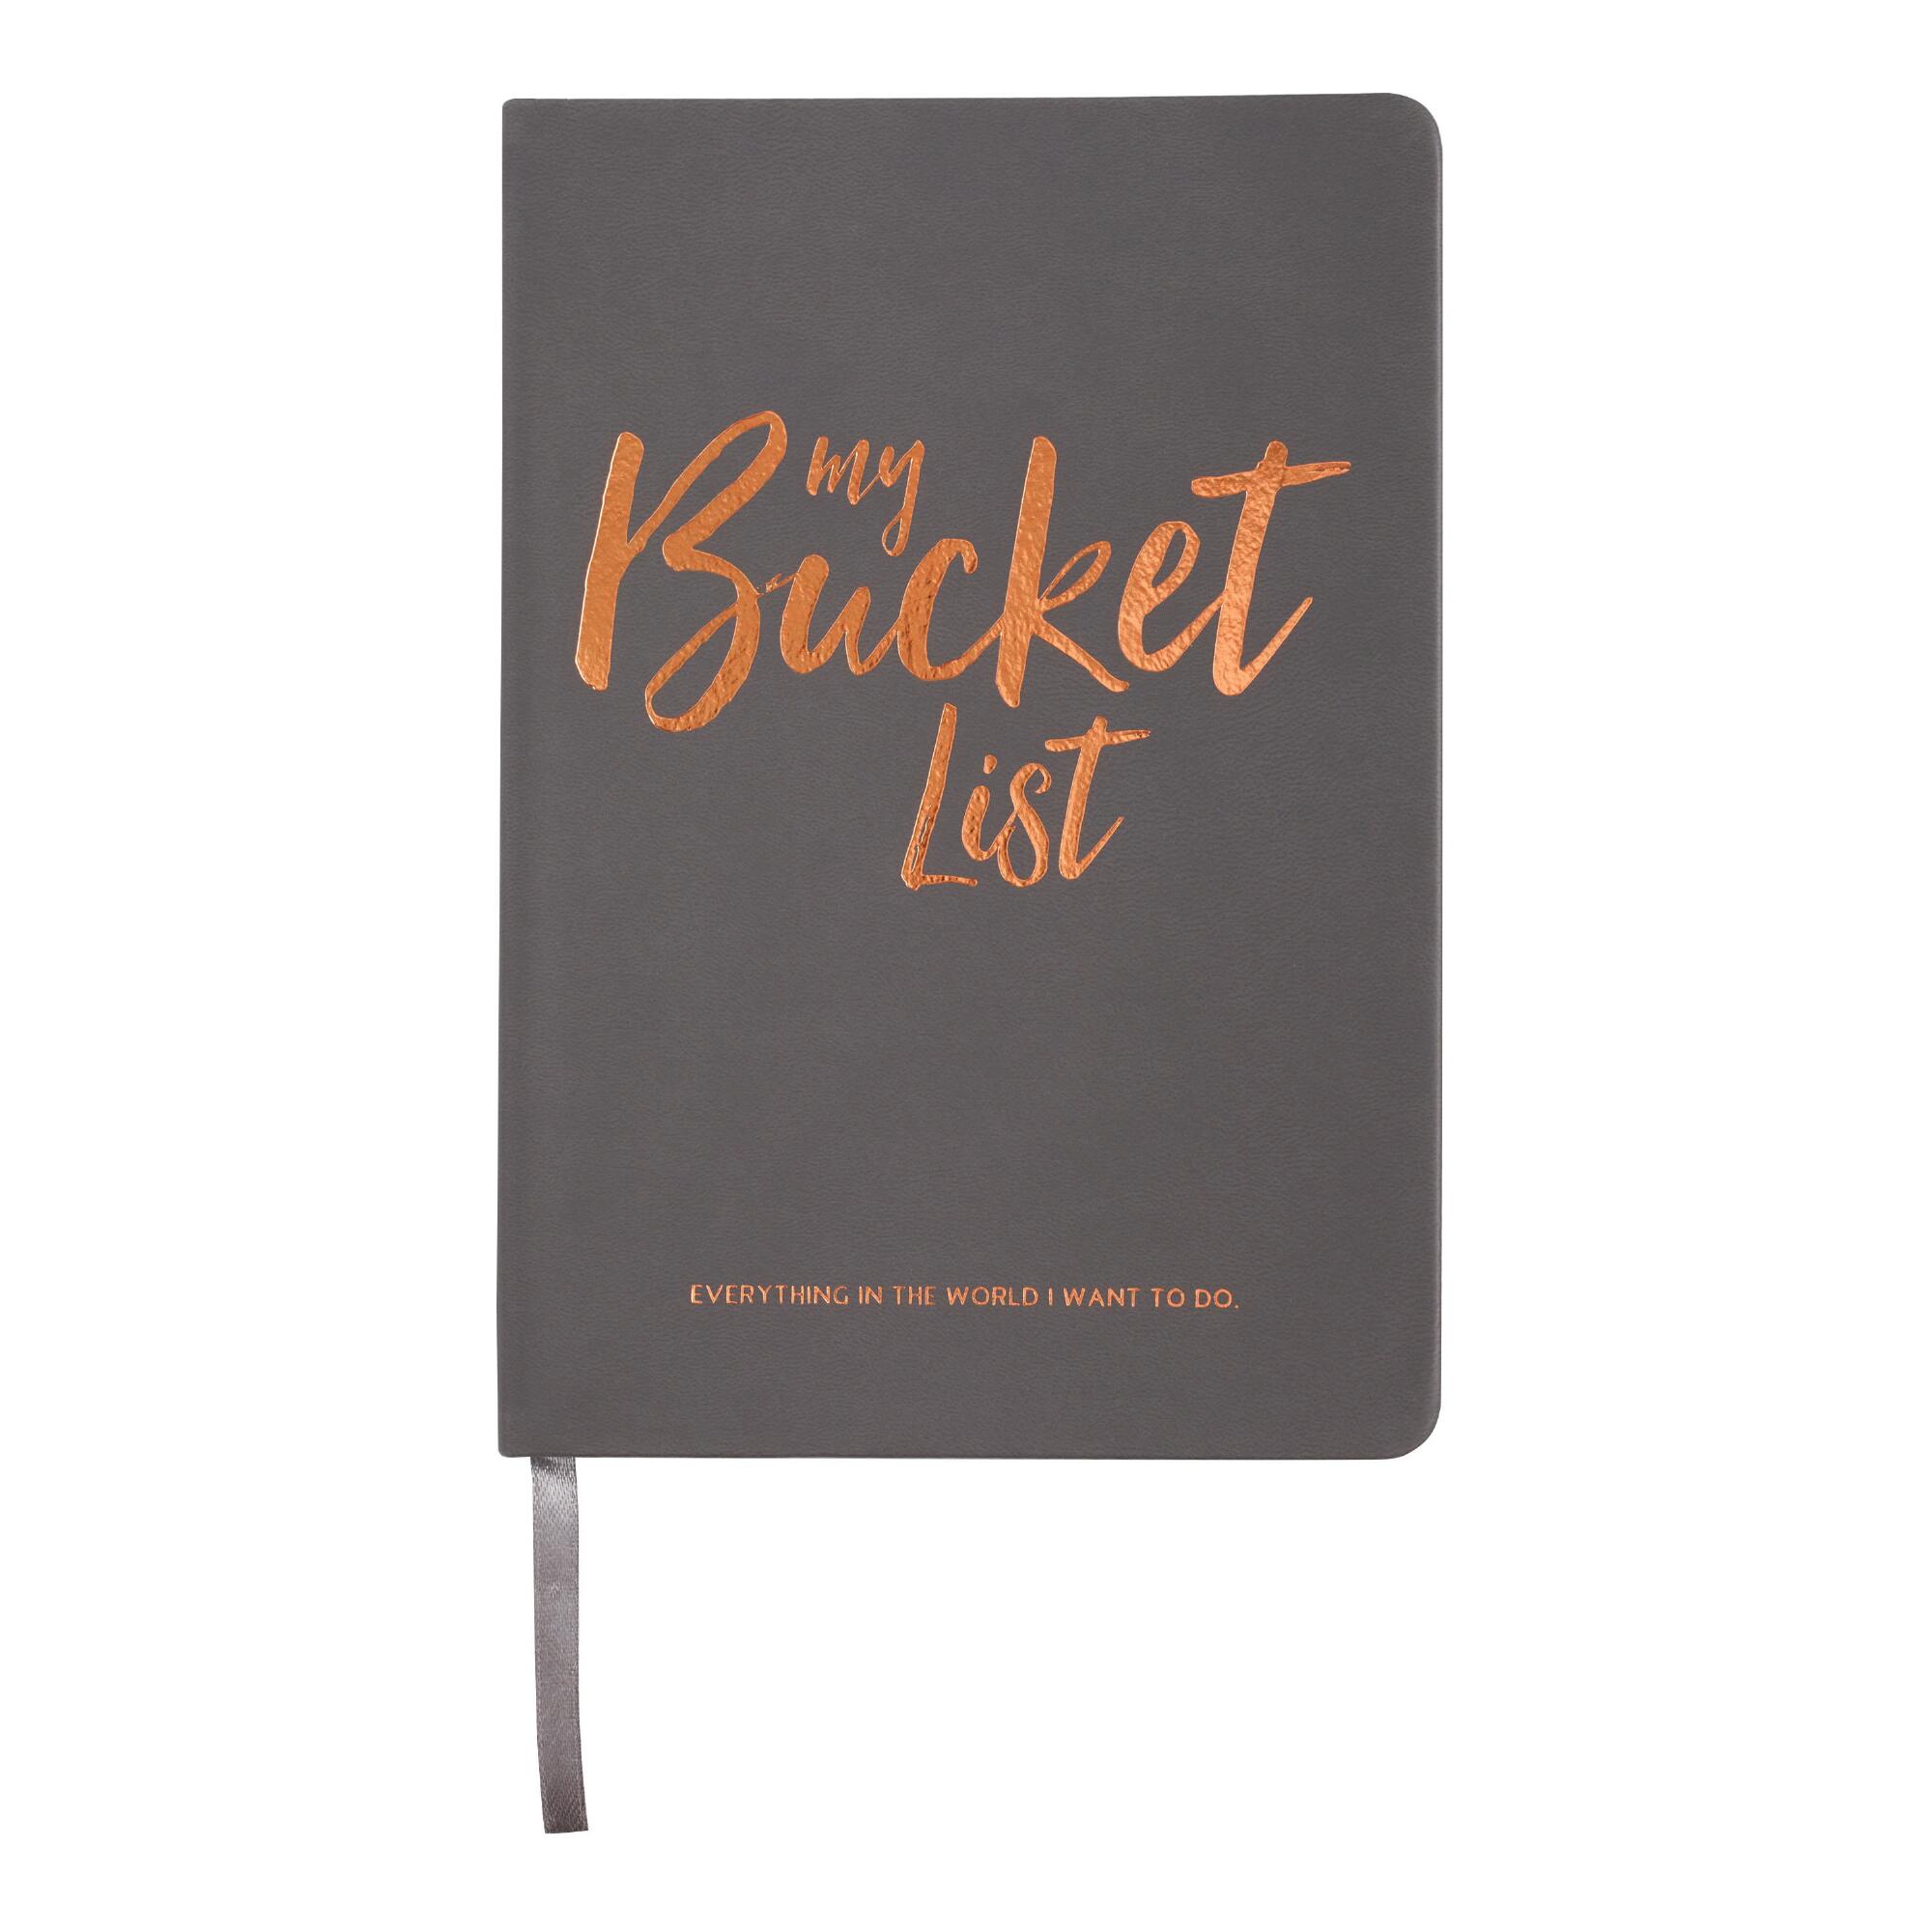 My Bucket List Guided Journal by World Market